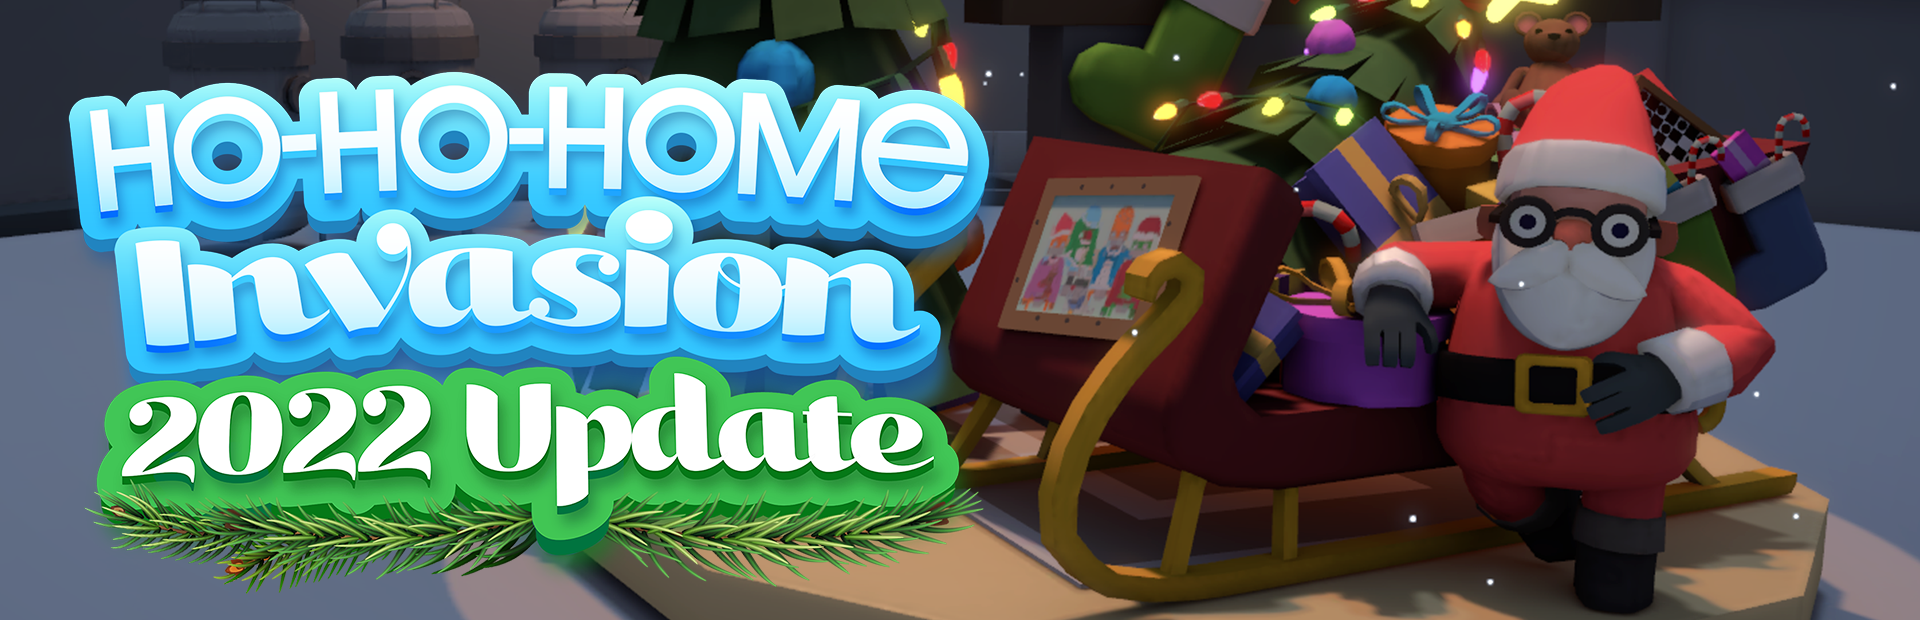 Christmas Video Game Ho-Ho-Home Invasion Gets a Free Festive Update